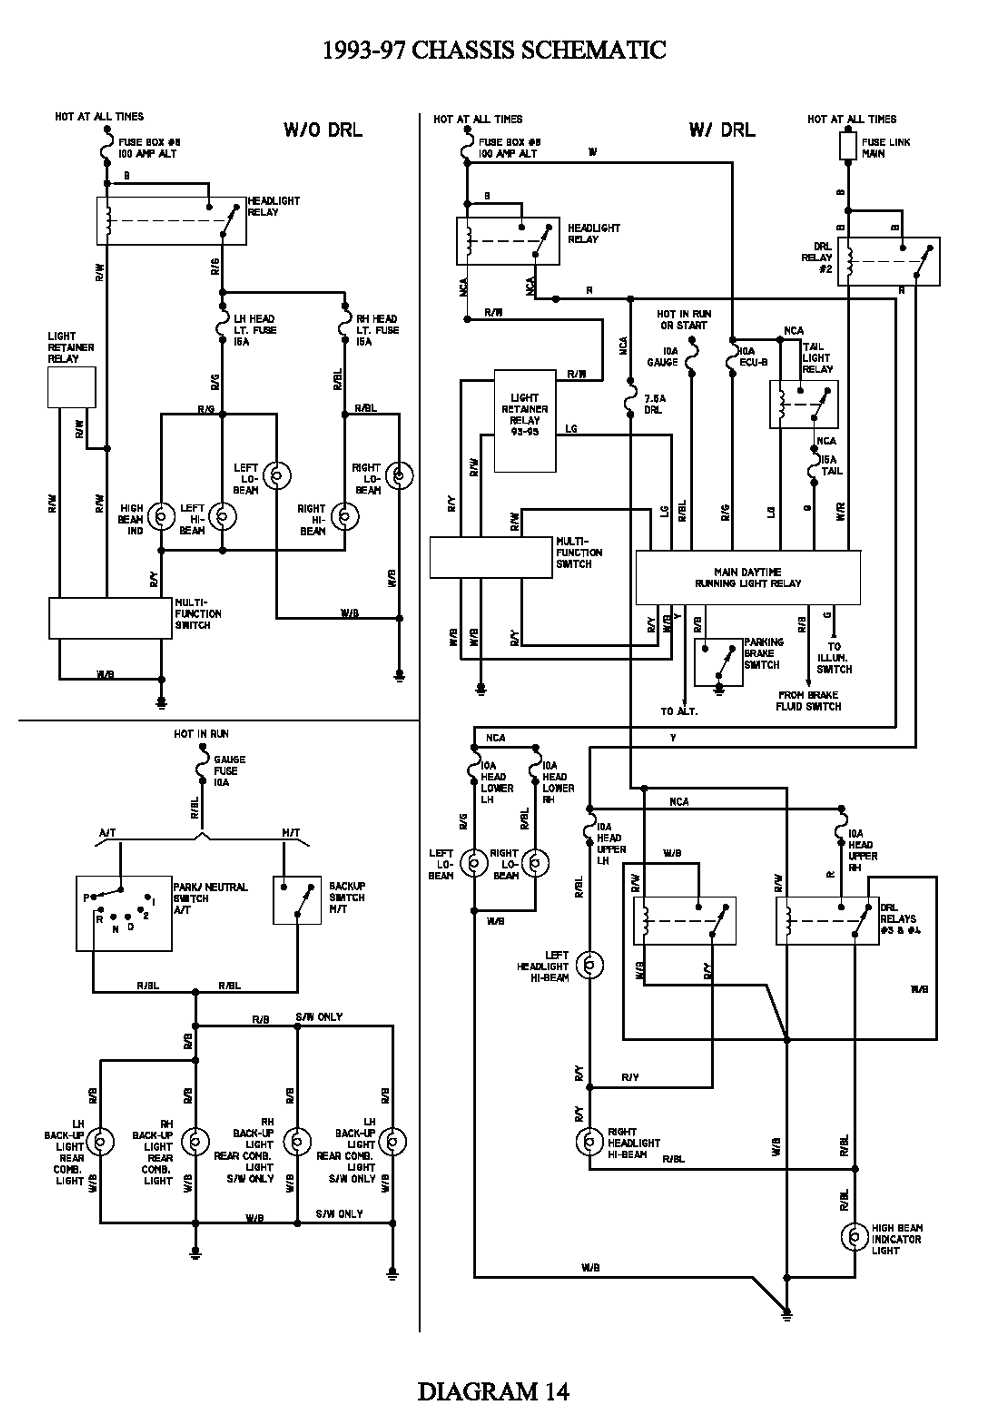 wiring diagram for 6 4 ford wipers wiring diagrams ments wiring diagram for 6 4 ford wipers